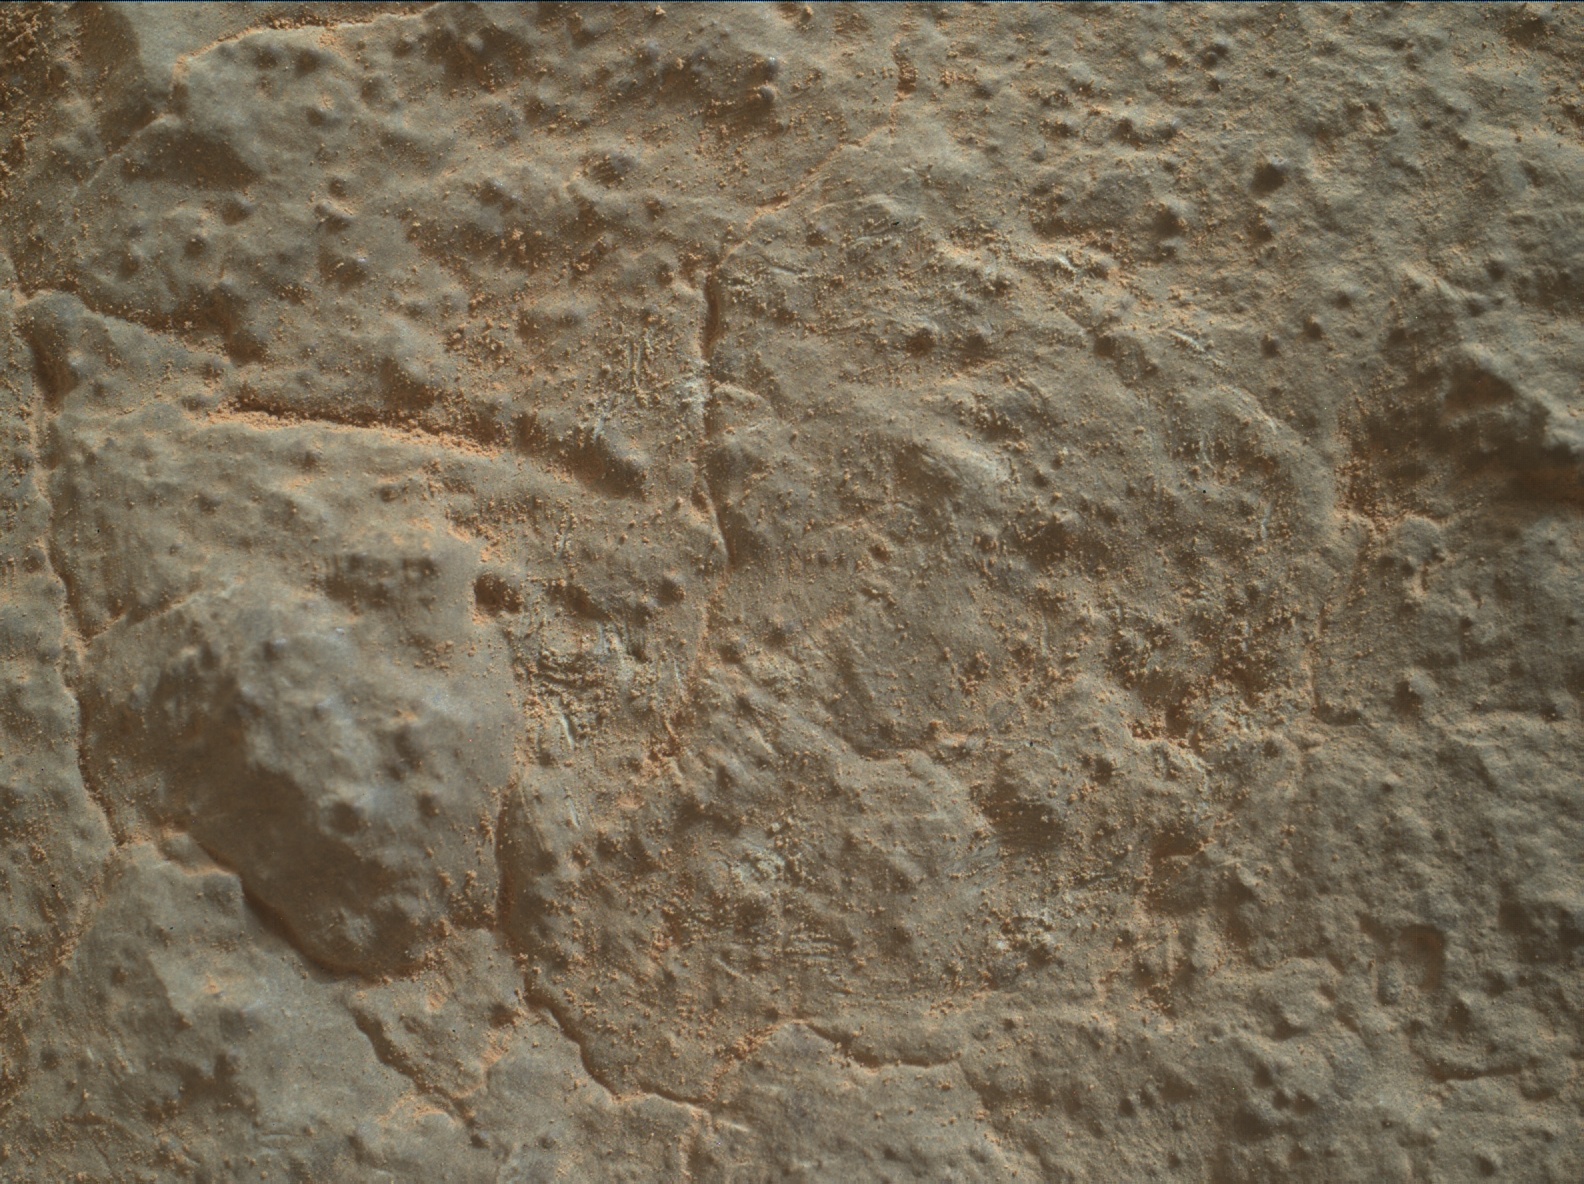 Nasa's Mars rover Curiosity acquired this image using its Mars Hand Lens Imager (MAHLI) on Sol 3453